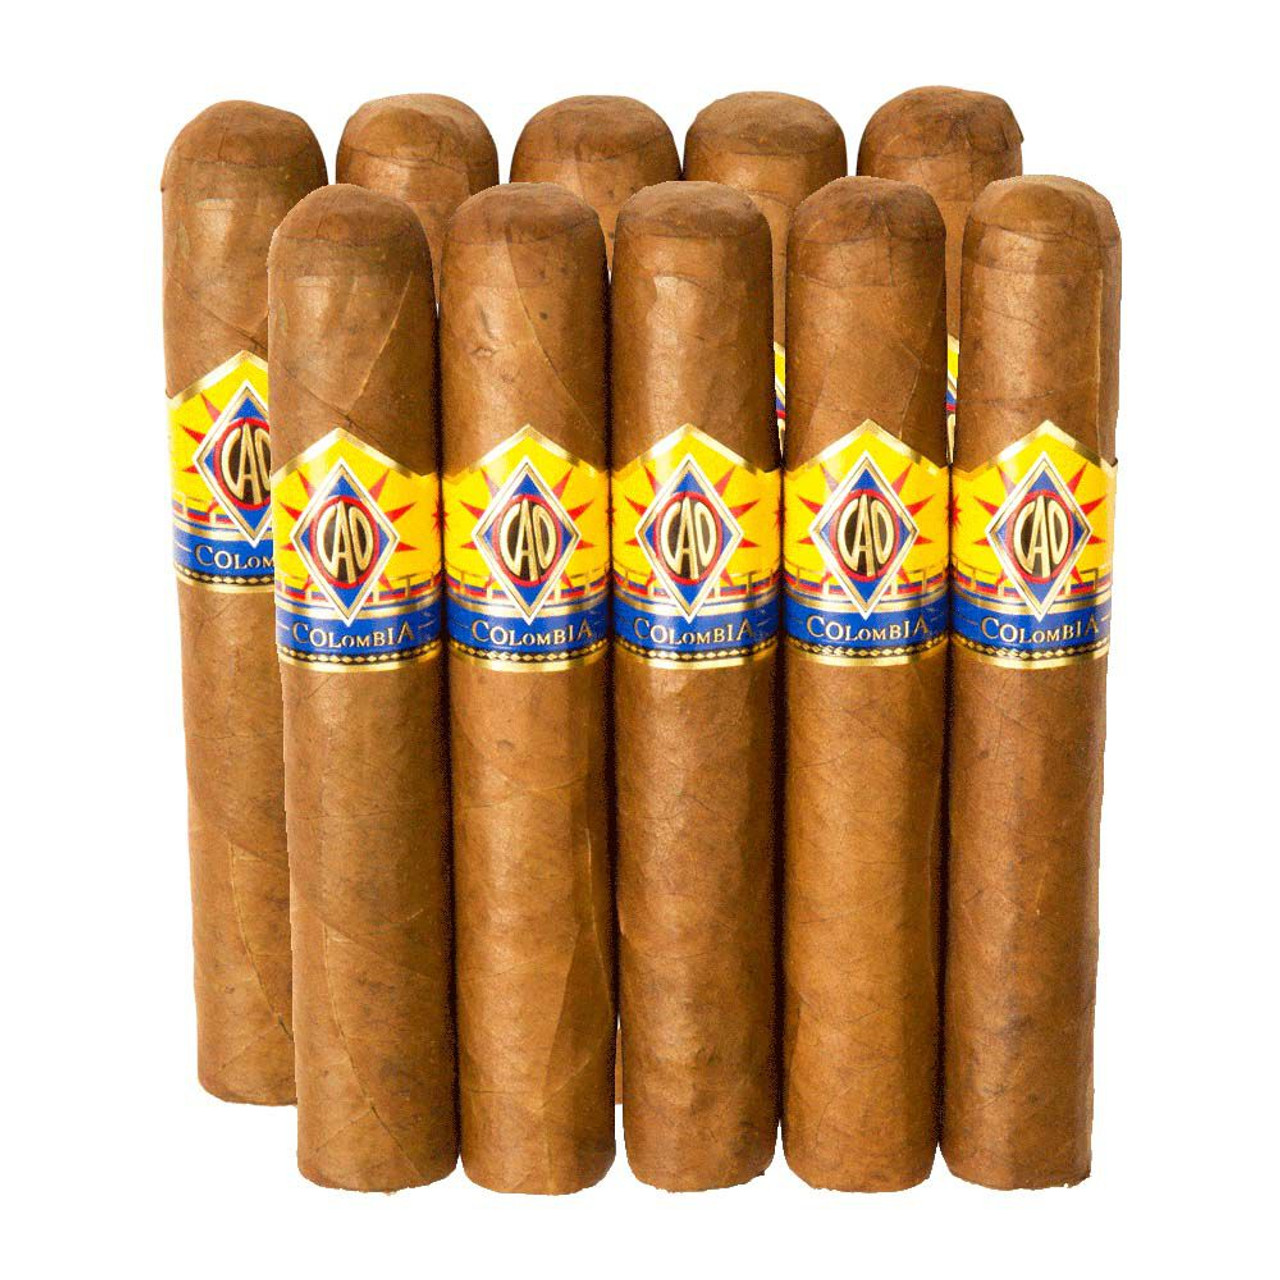 CAO Colombia Tinto Cigars - 5 x 50 (Pack of 10) *Box